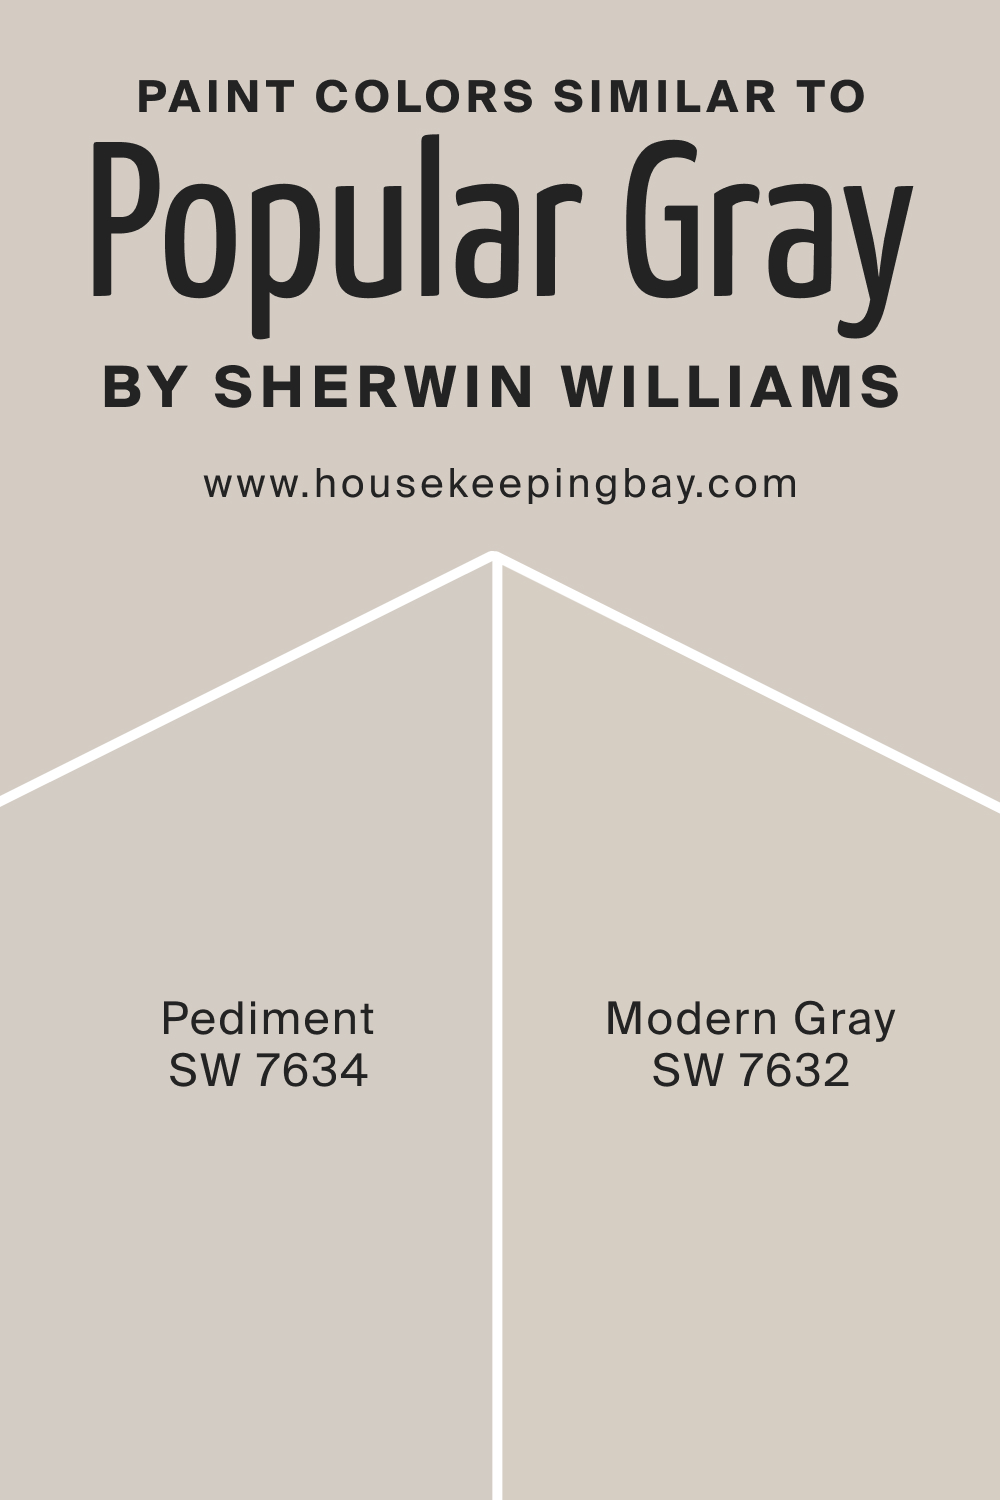 Paint Colors Similar to Popular Gray SW by Sherwin Williams